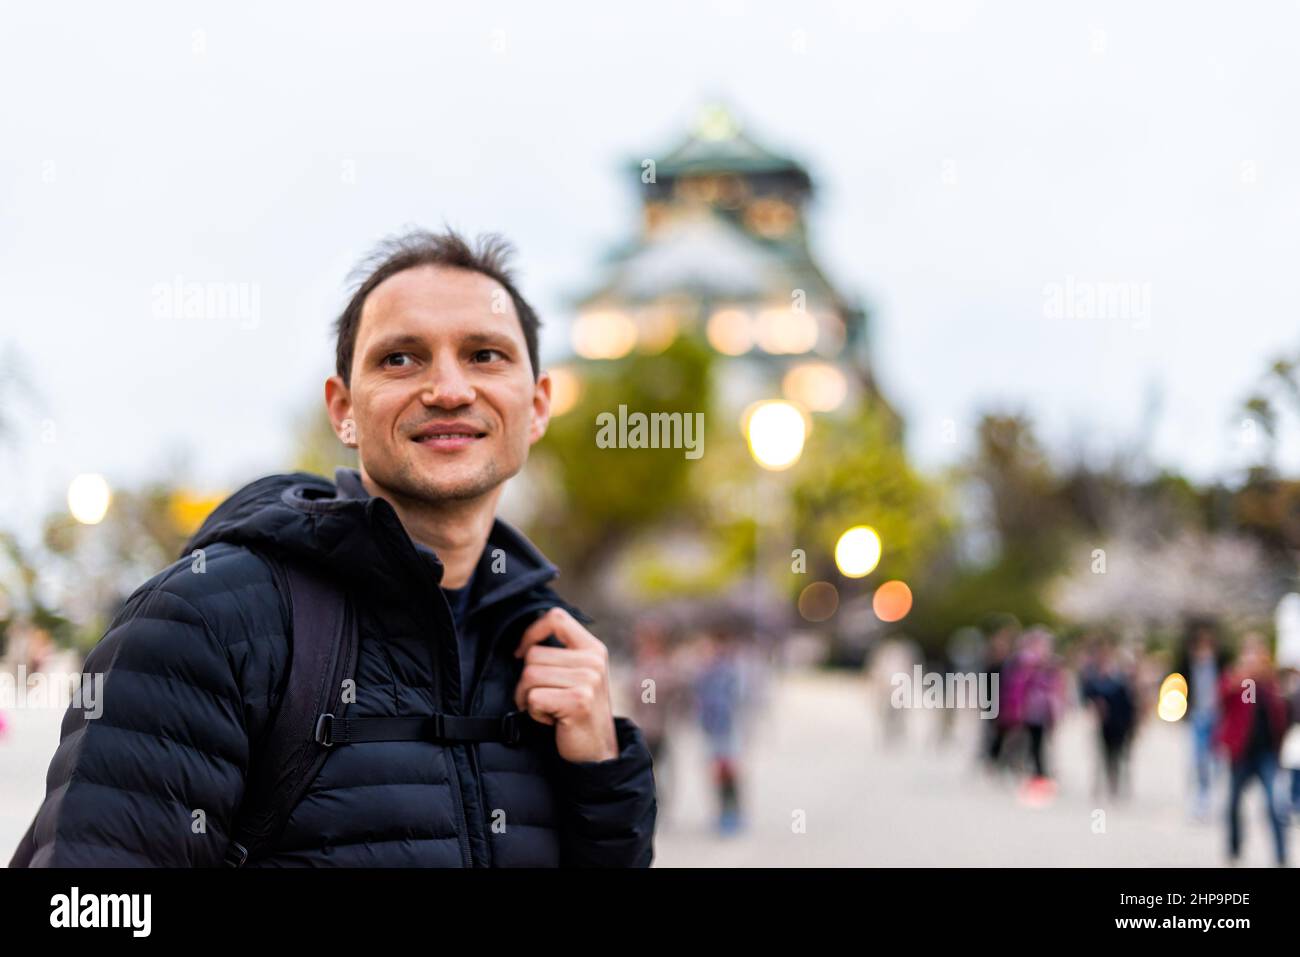 Osaka, Japan castle in evening with happy man tourist caucasian person happy smiling standing by building at night bokeh background with illumination Stock Photo